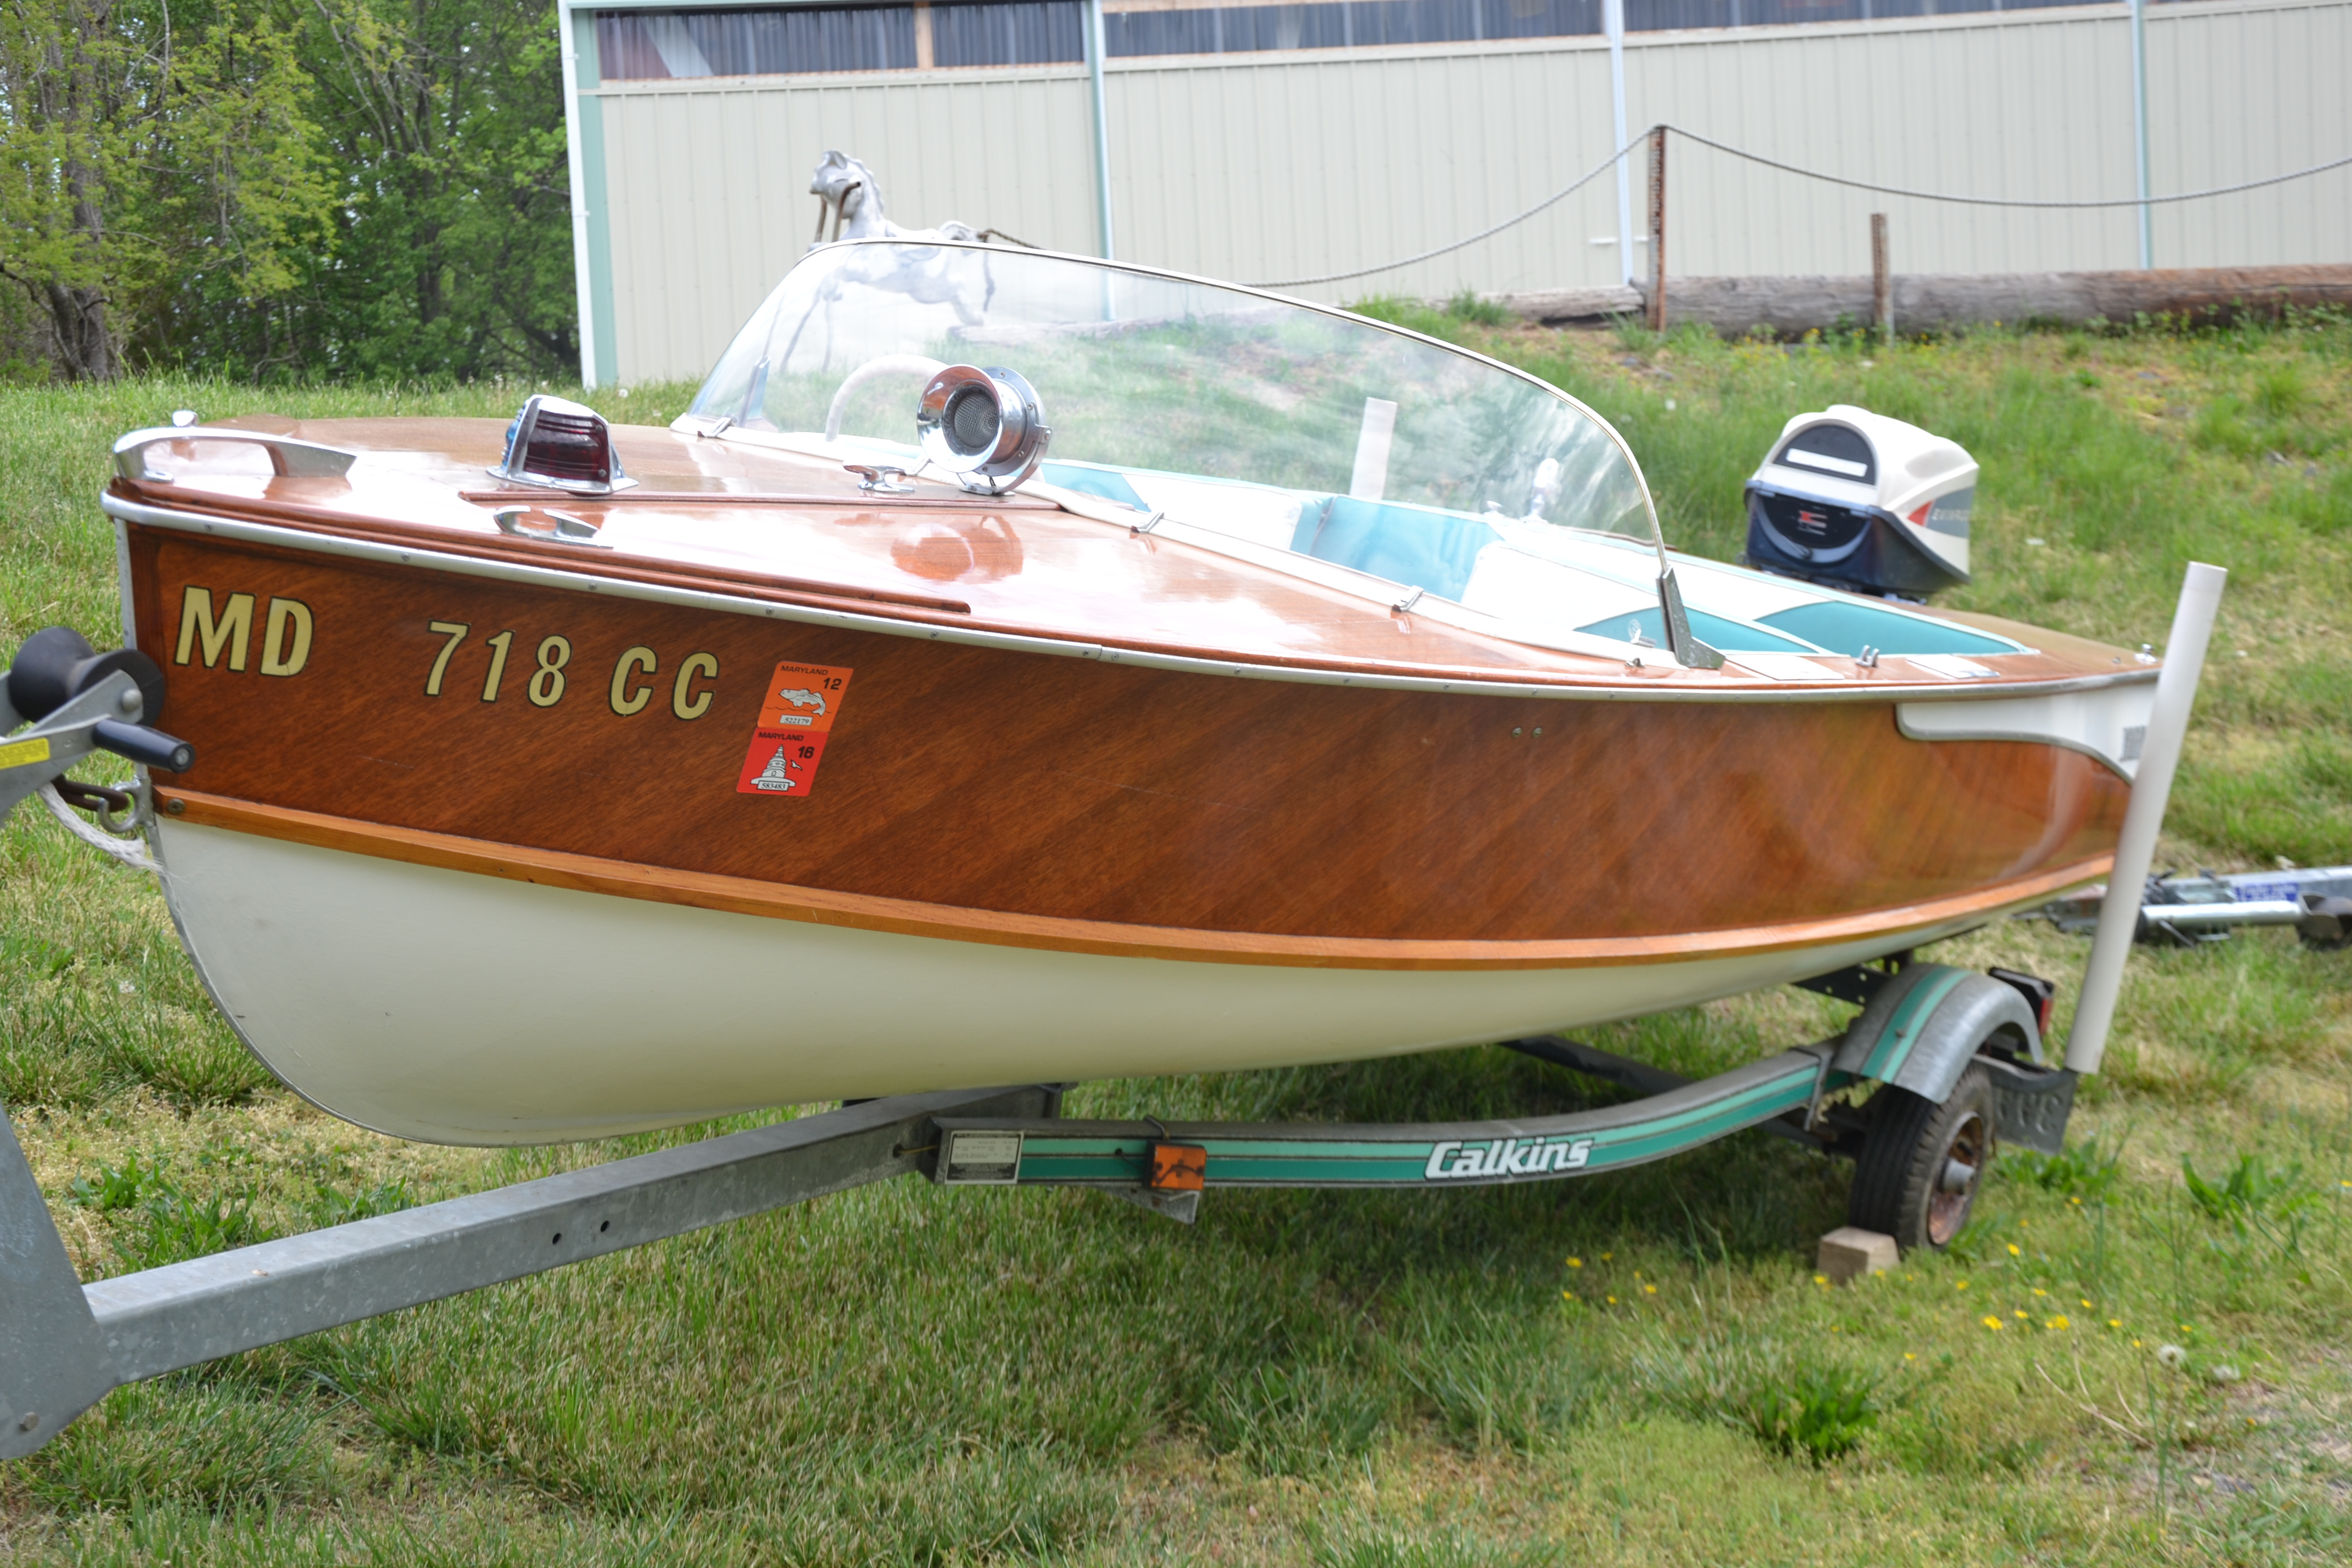 One of the boat's in Howard Johnson's collection.